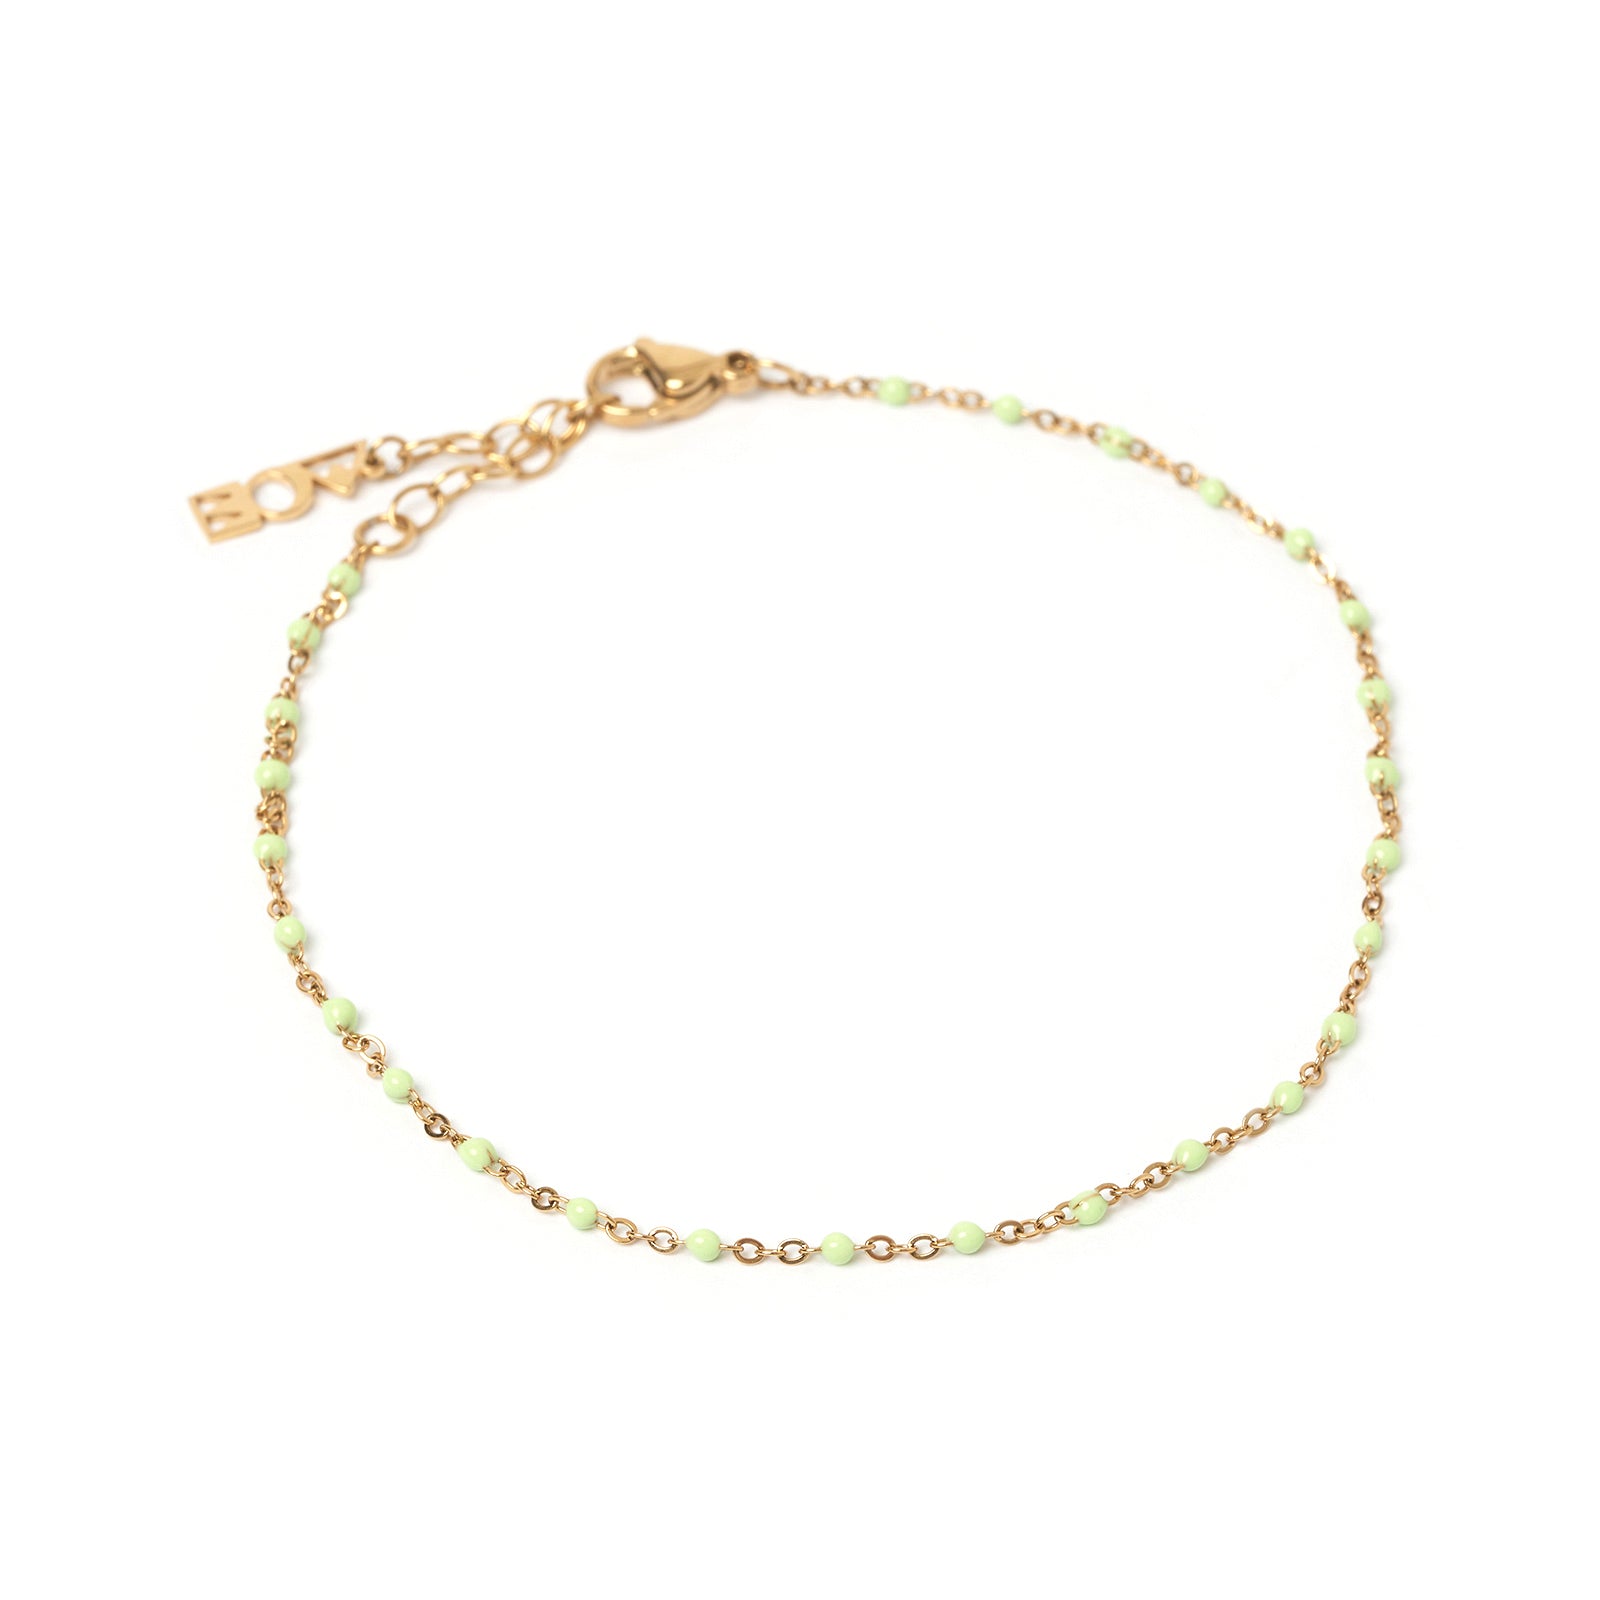 Peggy Gold and Enamel Anklet - Mint